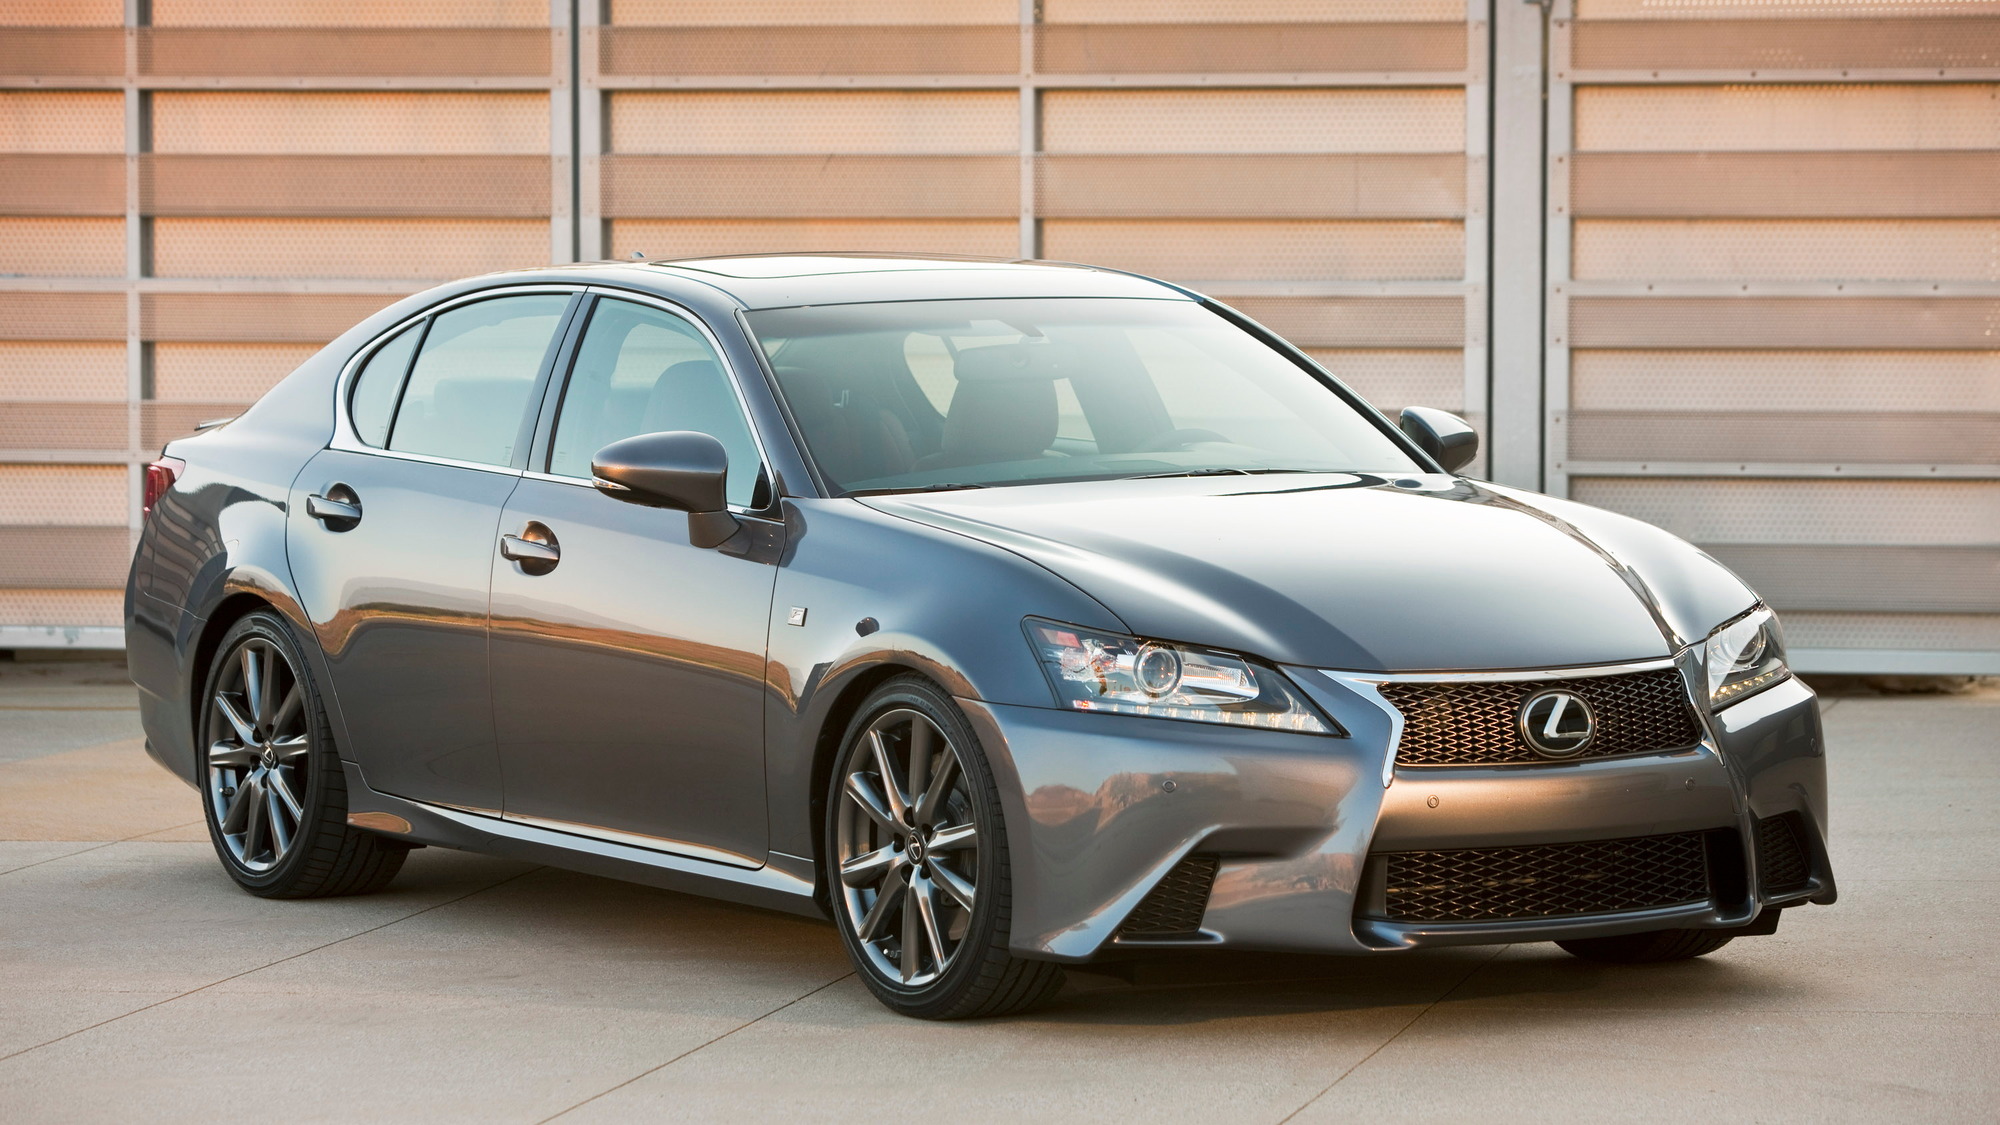 2013 Lexus Gs 350 F Sport To Be Fully Revealed At 2011 Sema Finally